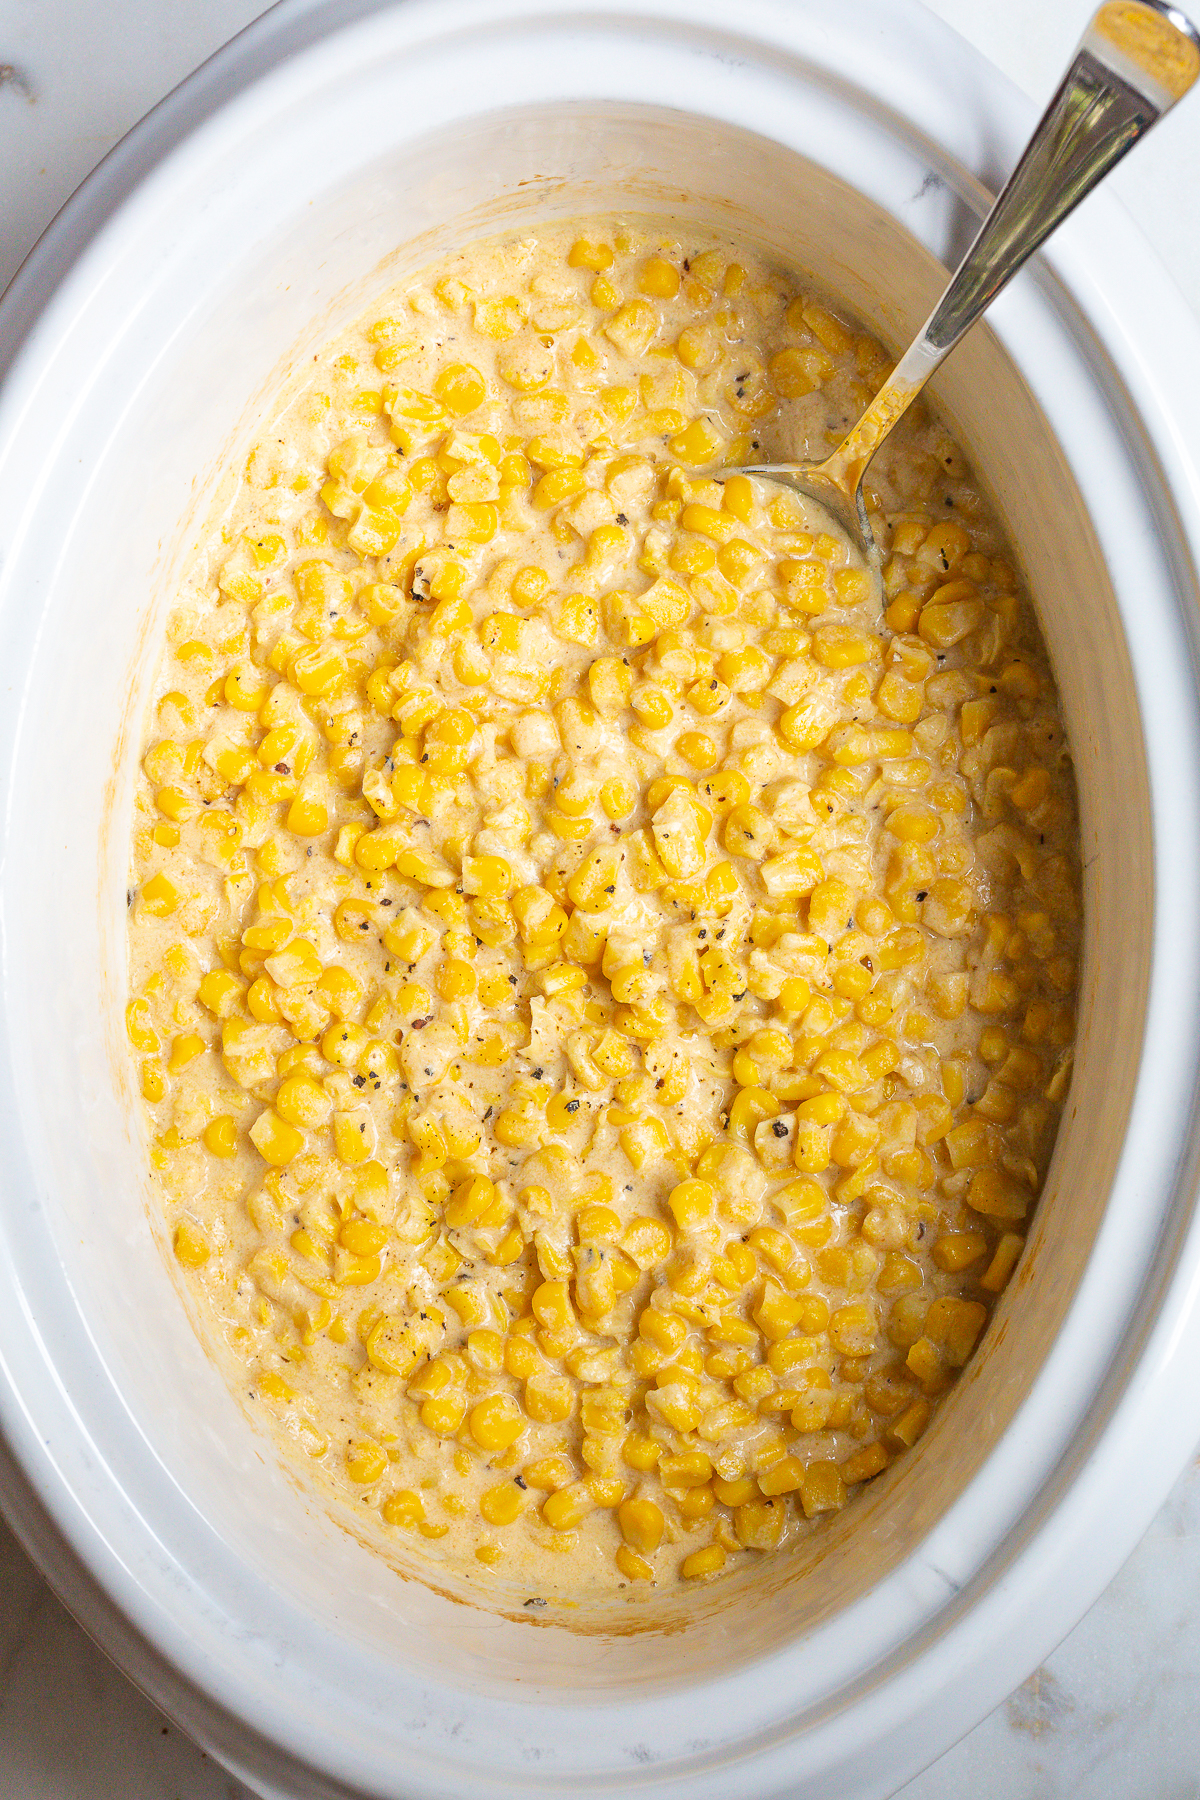 How To Make Creamed Corn  #ASpicyPerspective #corn #thanksgiving #holidays #southern #crockpot #slowcooker